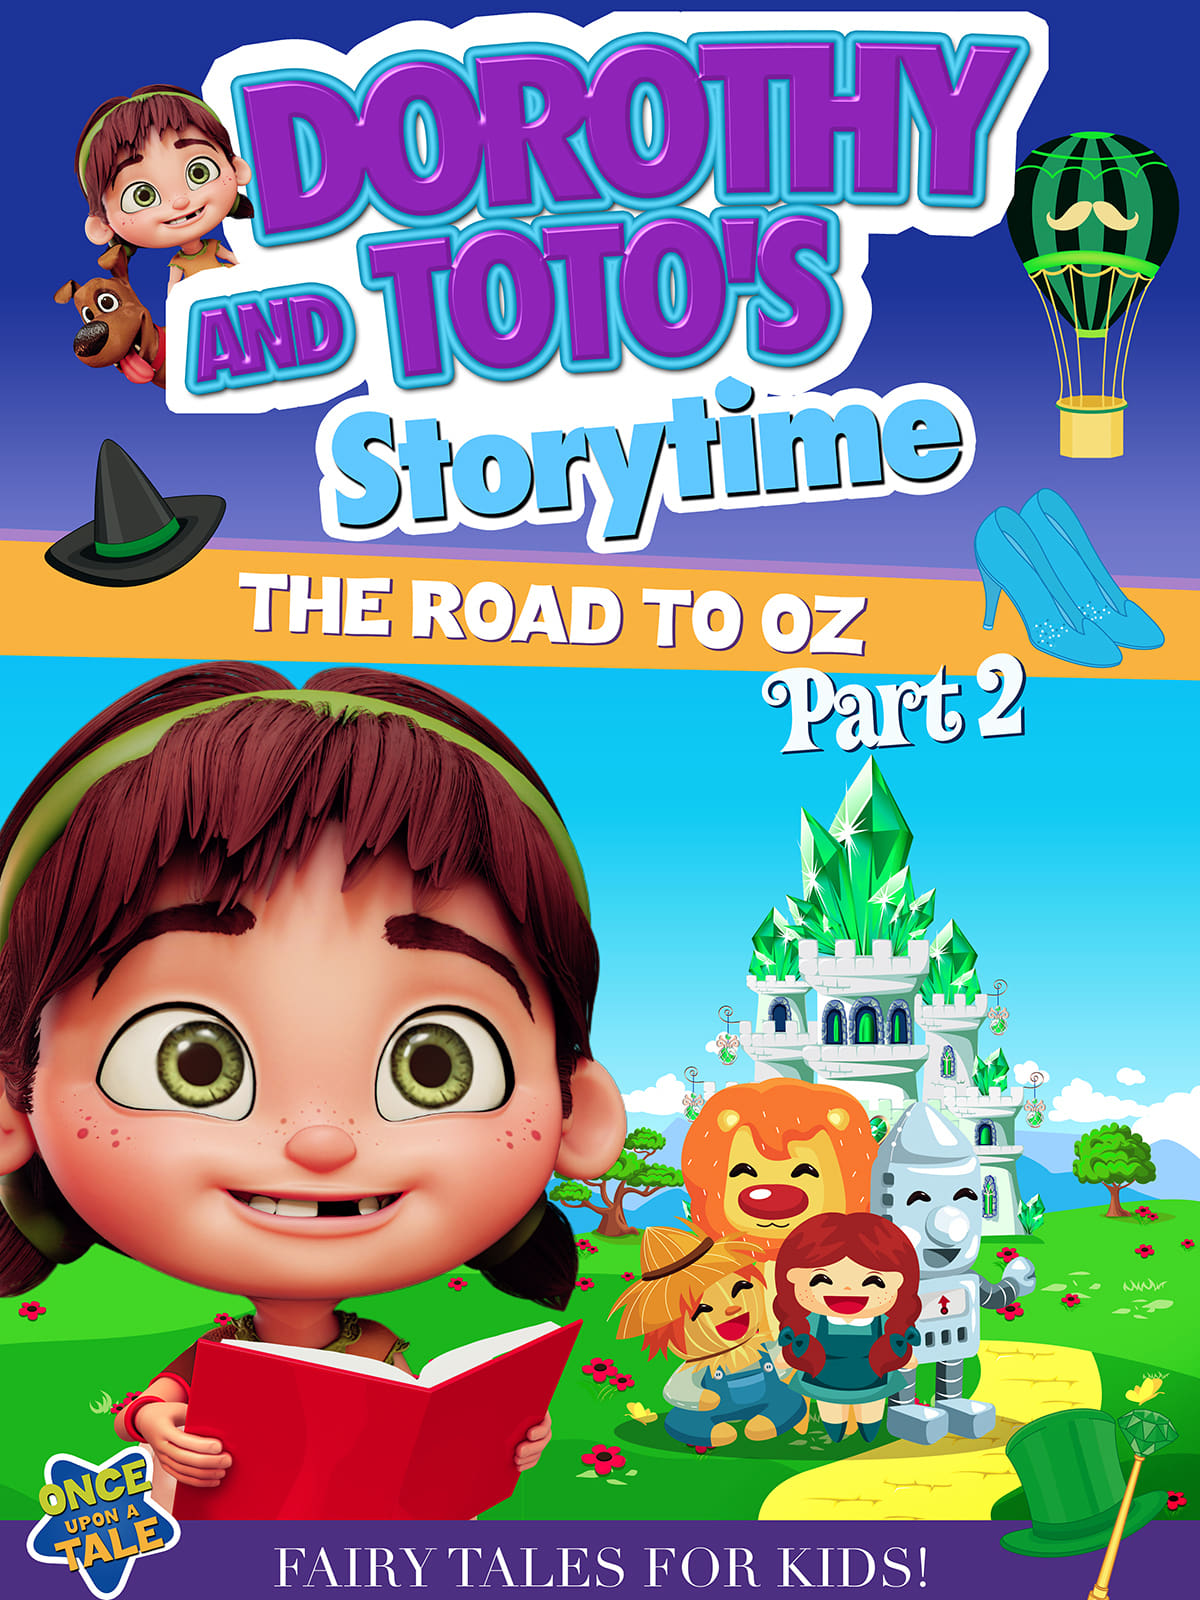 Dorothy And Toto's Storytime: The Road To Oz Part 2